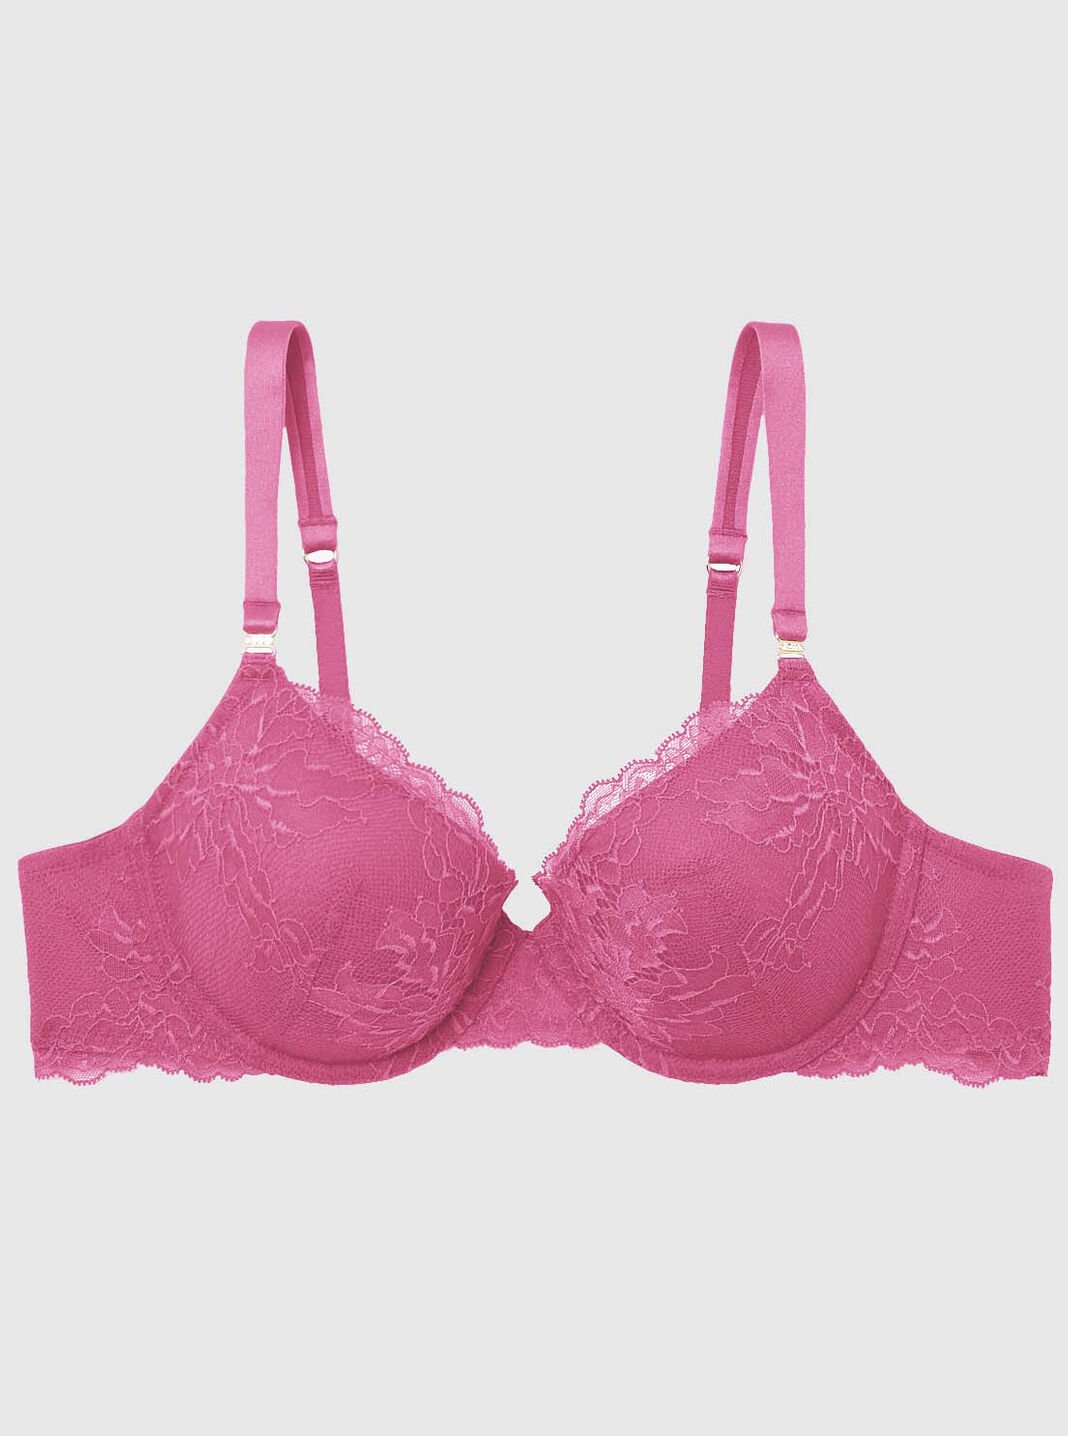 La Senza - TAKE THE PLUNGE: ALL NEW Beyond Sexy V-Wire Collection! The #1  Bra for low-cut sexy styles! Plus ---> Bras Now: Buy 1 Get 1 50% Off 🇨🇦 &  $25